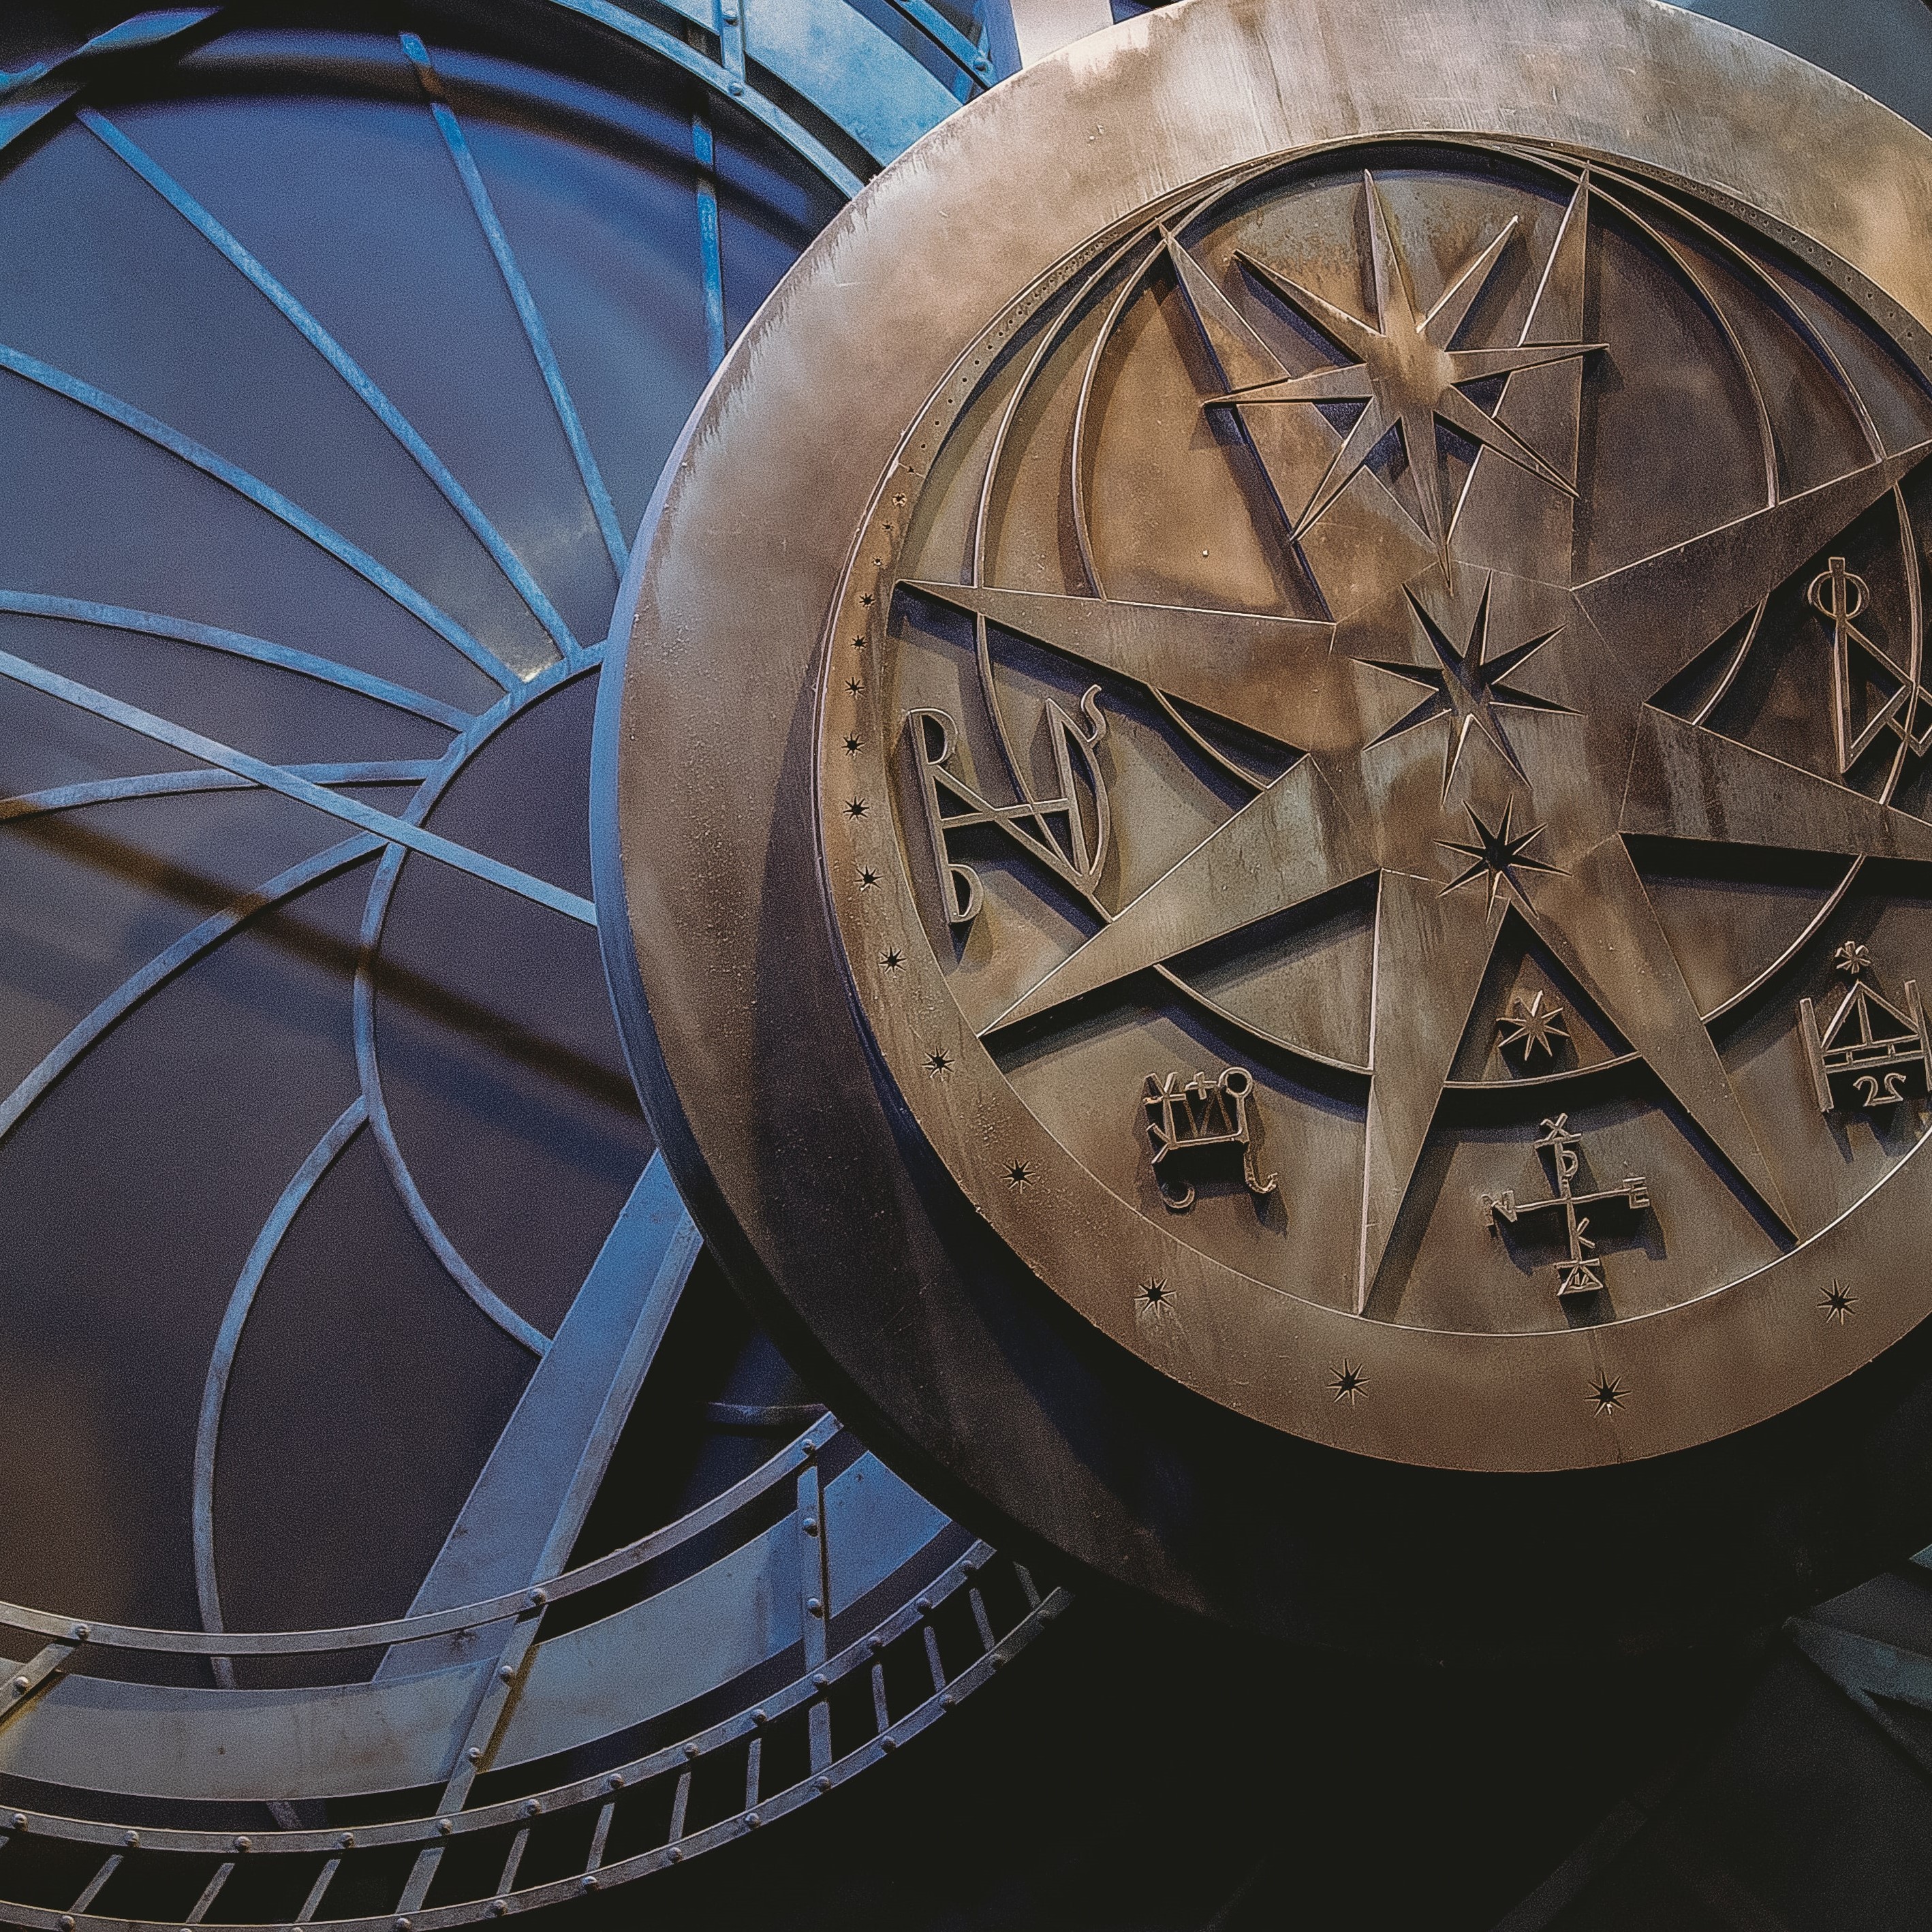 A circular object with multiple sets of strange symbols hovers over some other concentric circles. Credit to Rhii Photography</a> on Unsplash.